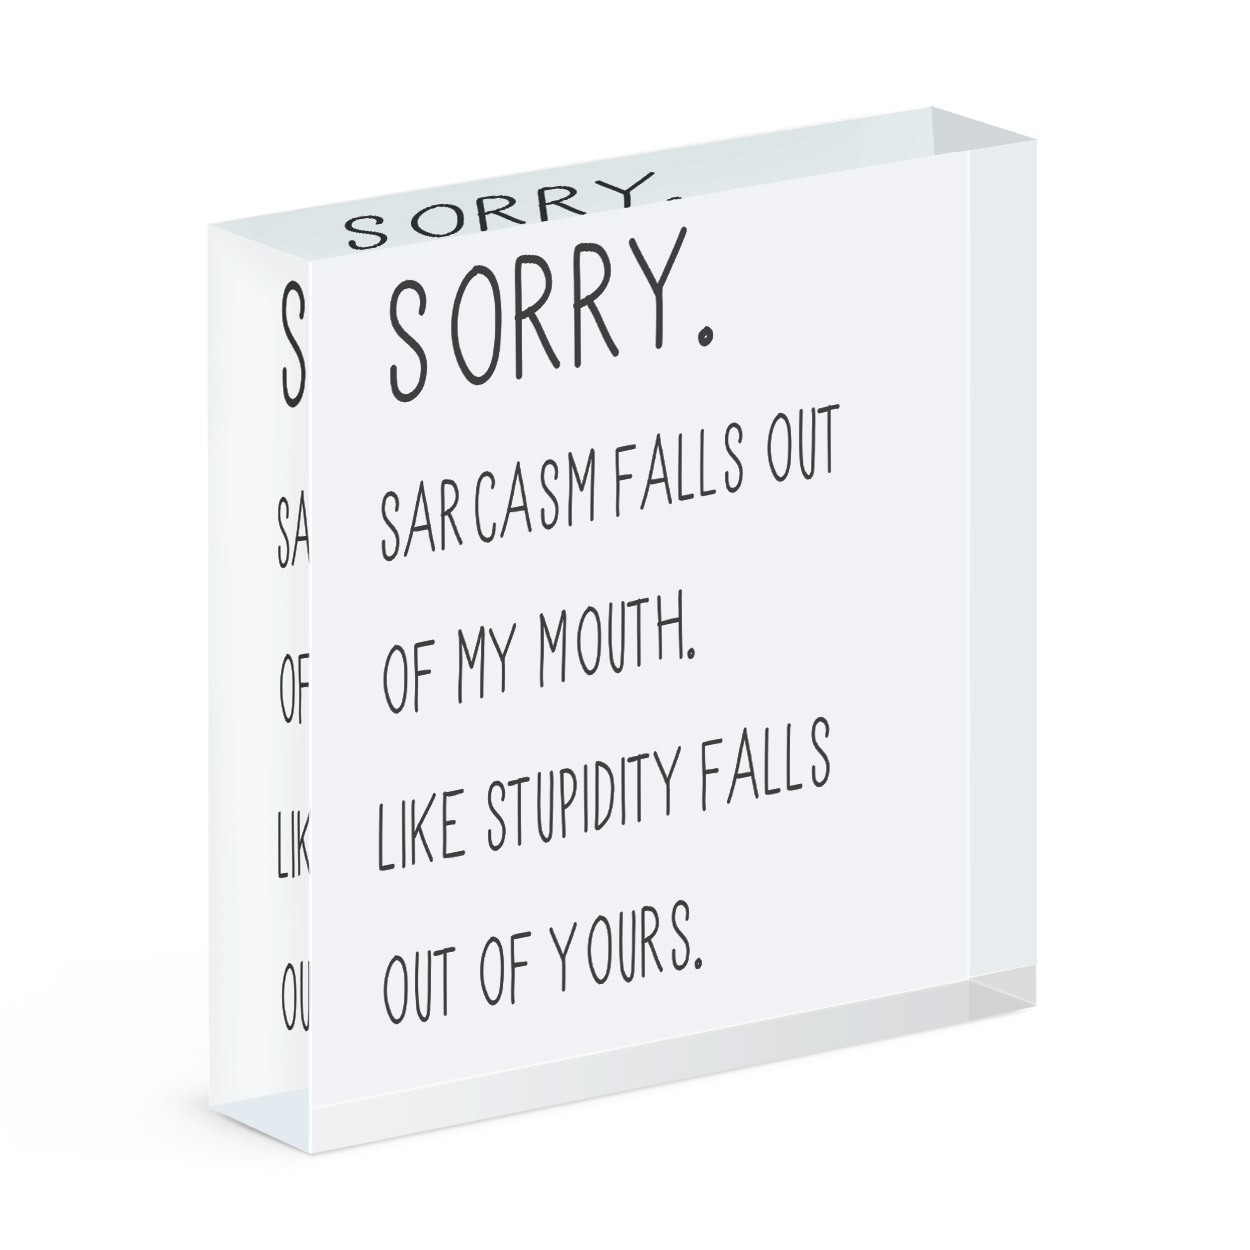 Sorry Sarcasm Falls Out Of My Mouth Acrylic Block